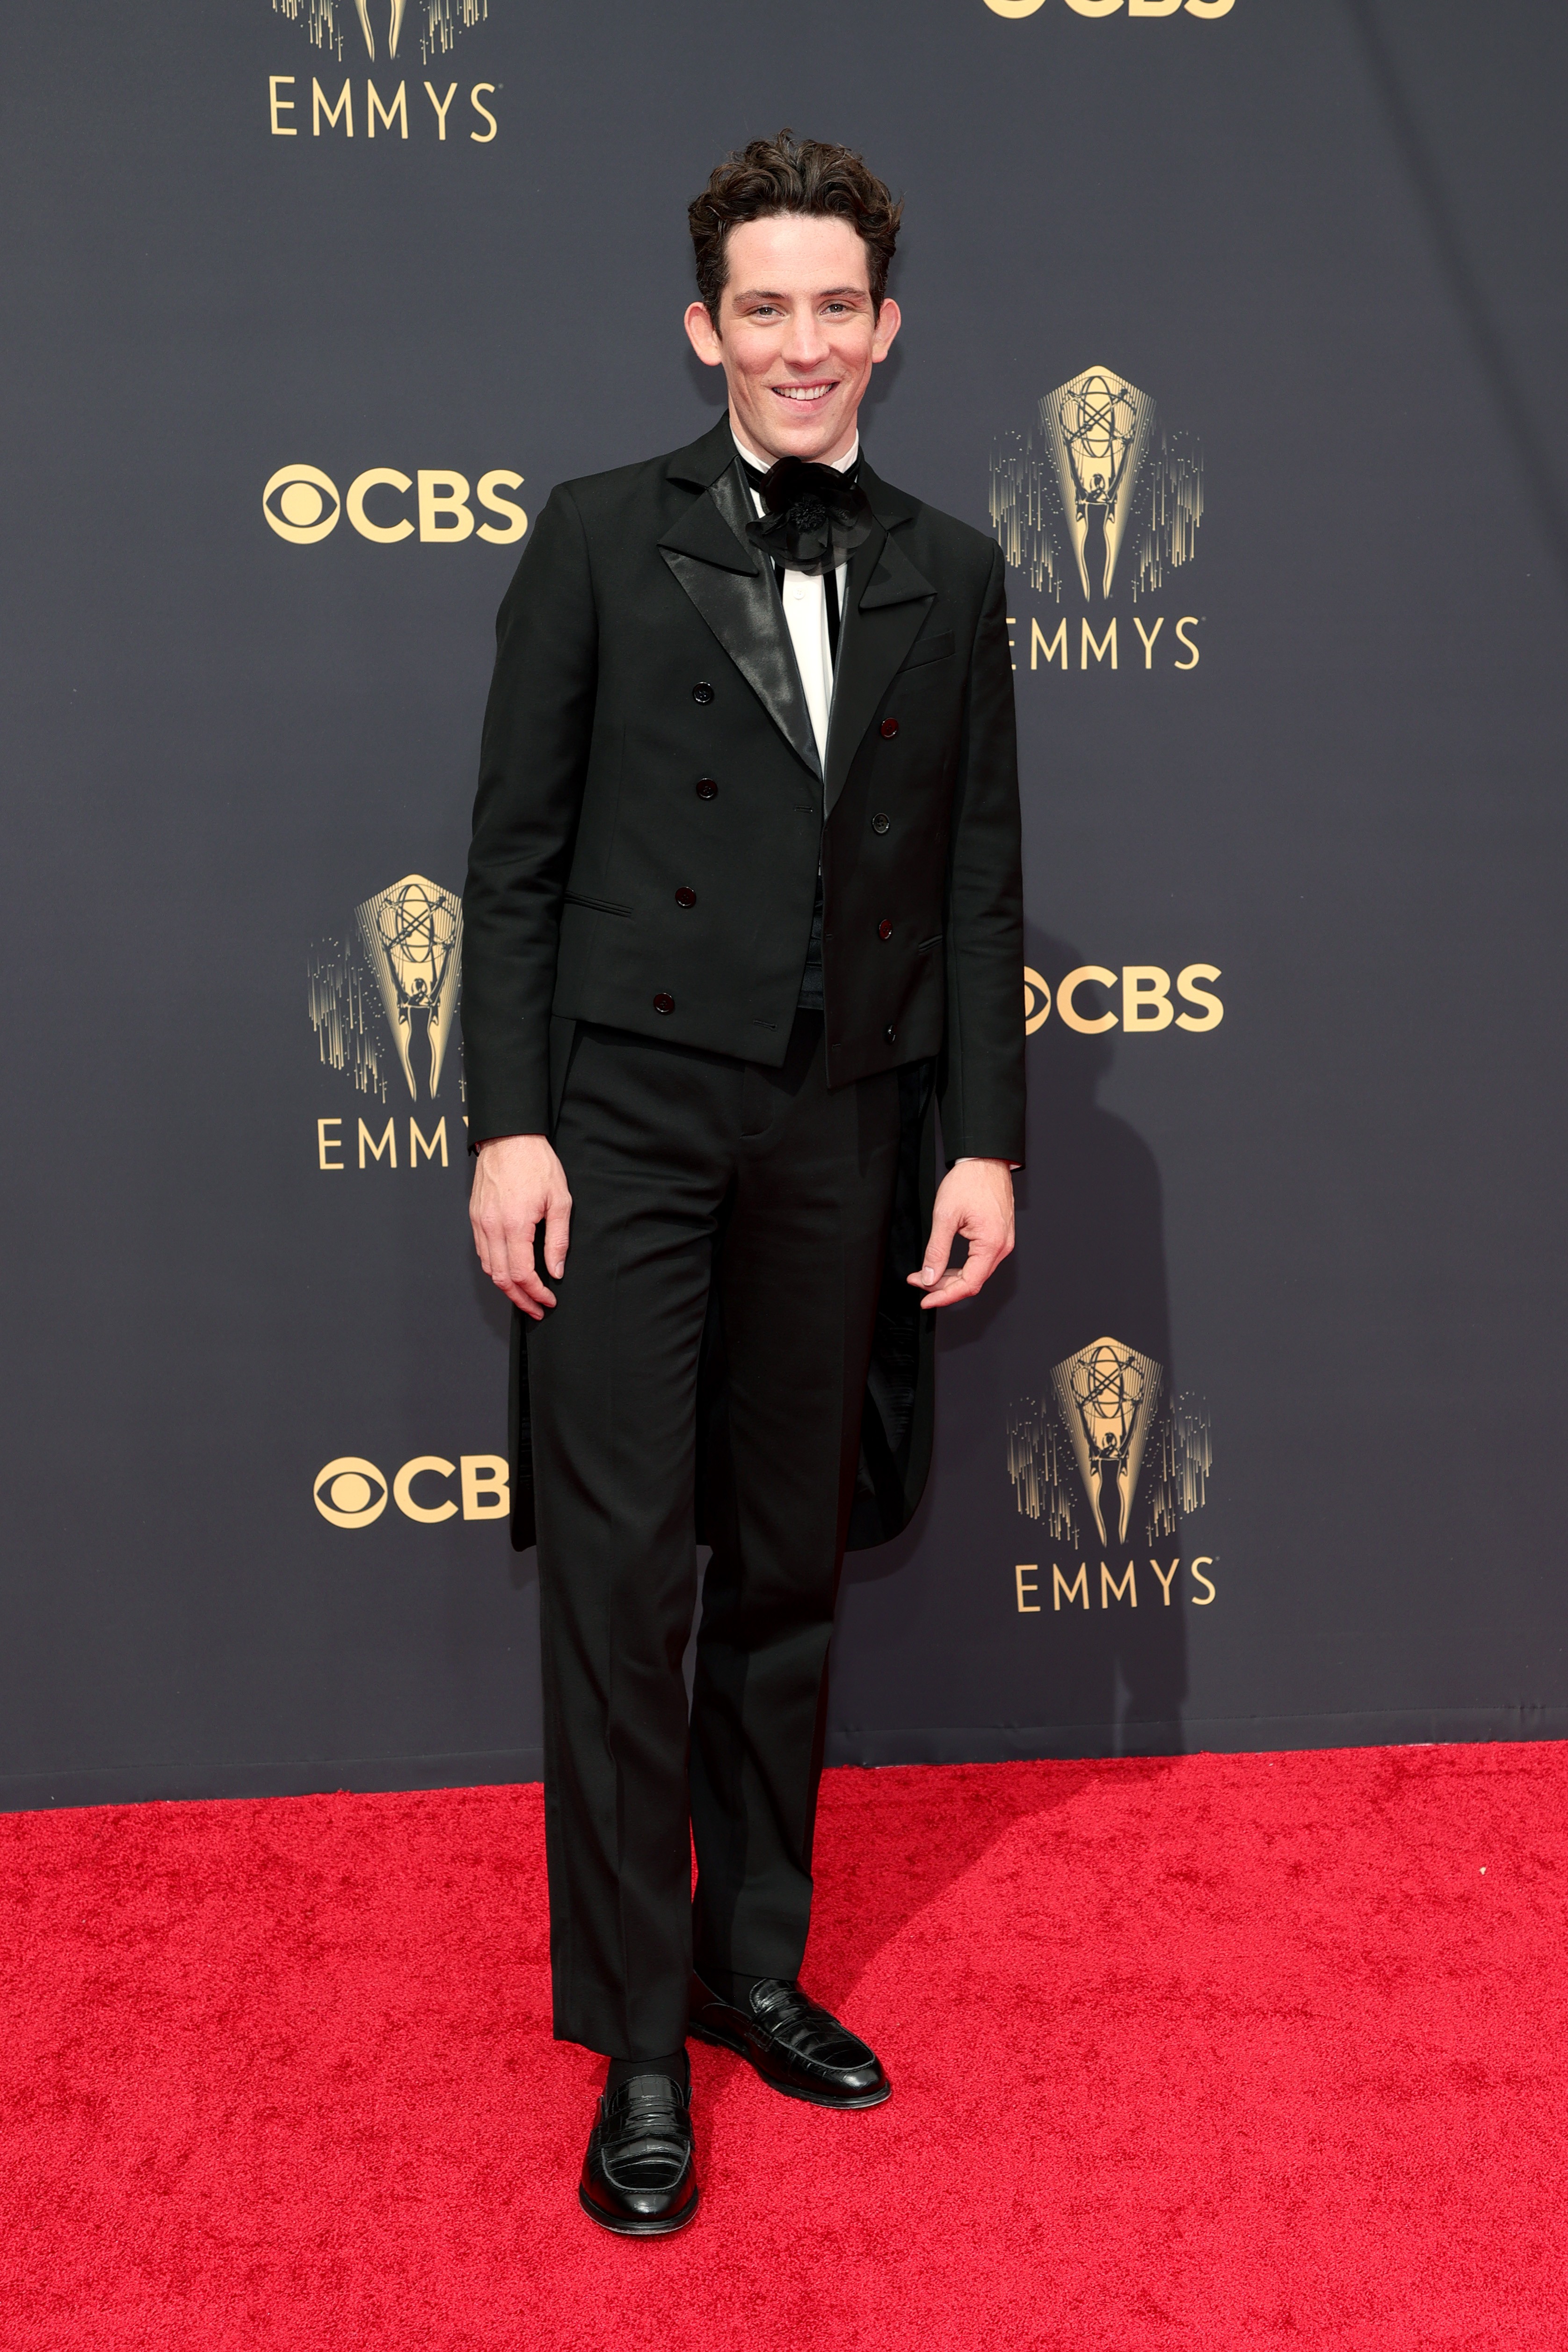 LOS ANGELES, CALIFORNIA - SEPTEMBER 19: Josh O'Connor attends the 73rd Primetime Emmy Awards at L.A. LIVE on September 19, 2021 in Los Angeles, California. (Photo by Rich Fury/Getty Images) (Foto: Getty Images)